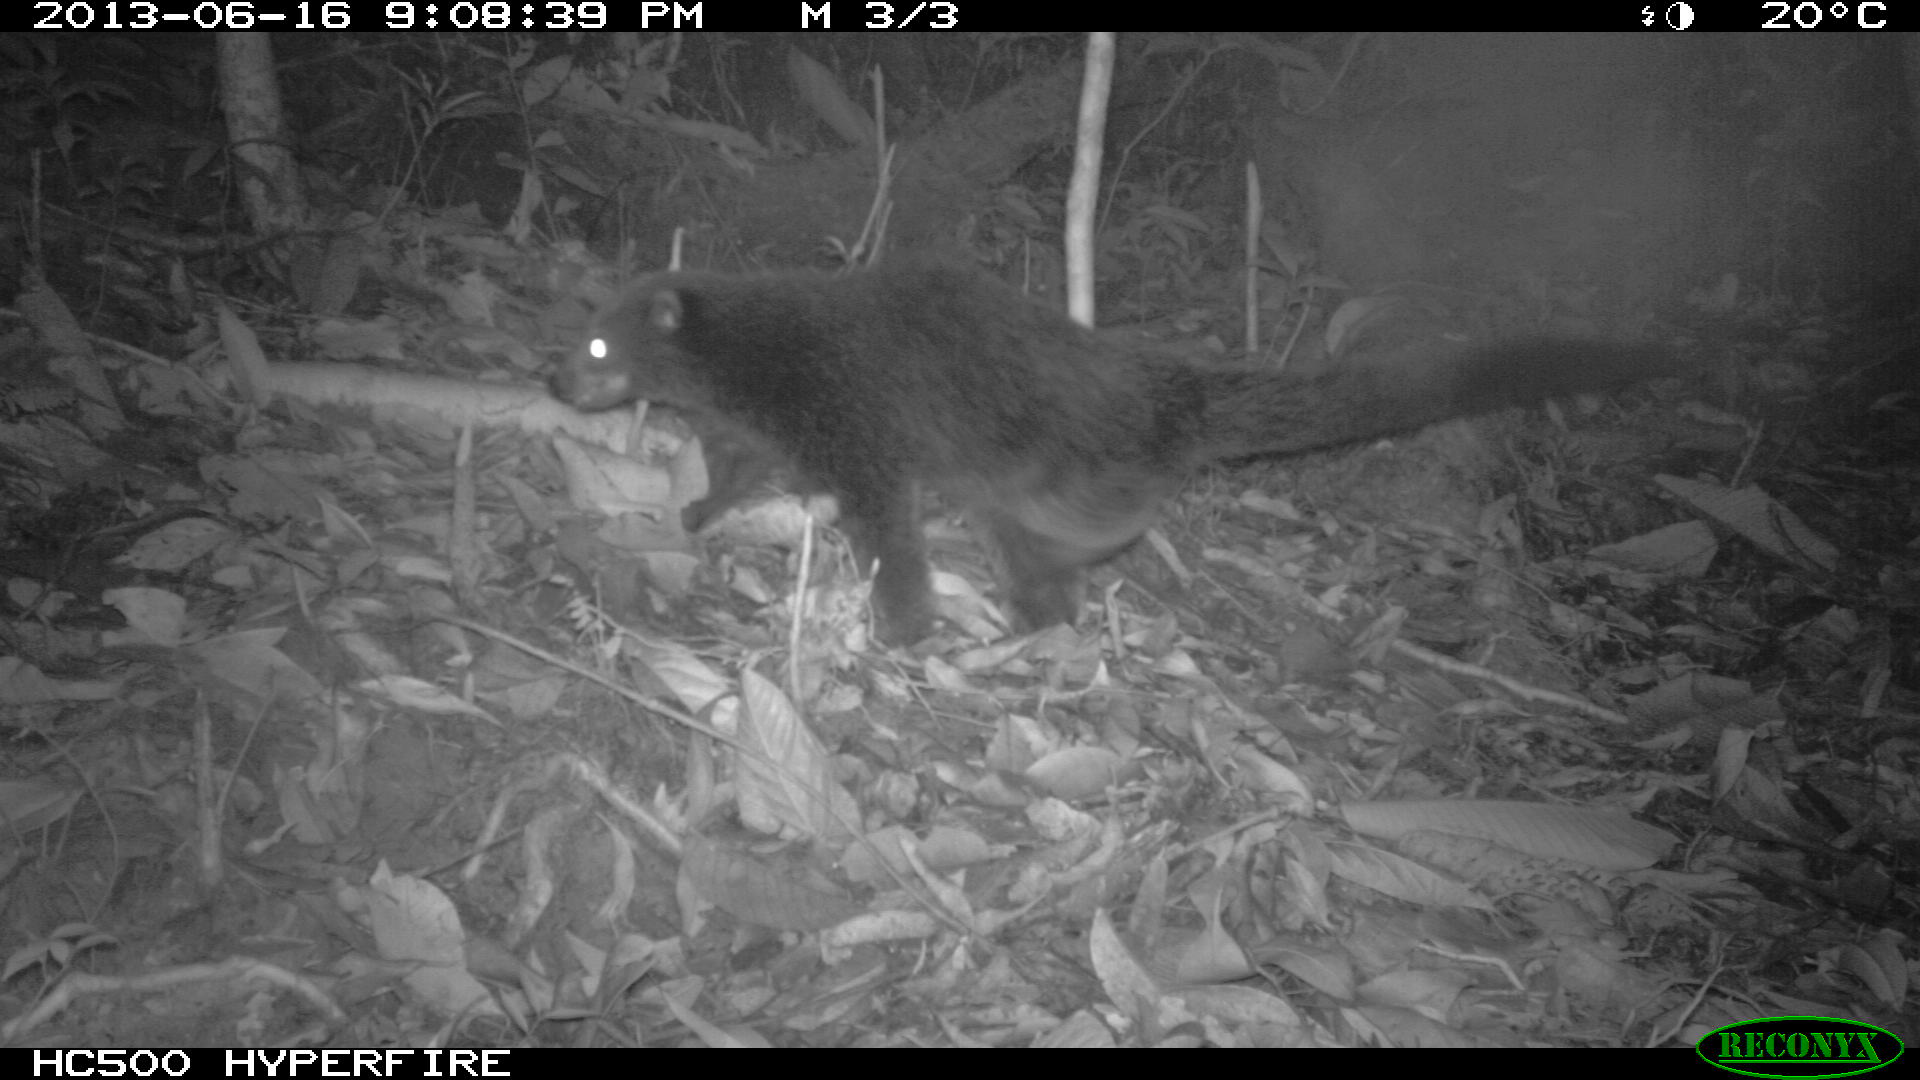 More Photos From the Sela’an Linau Forest Management Unit | Hose's Civet & Small ...1920 x 1080